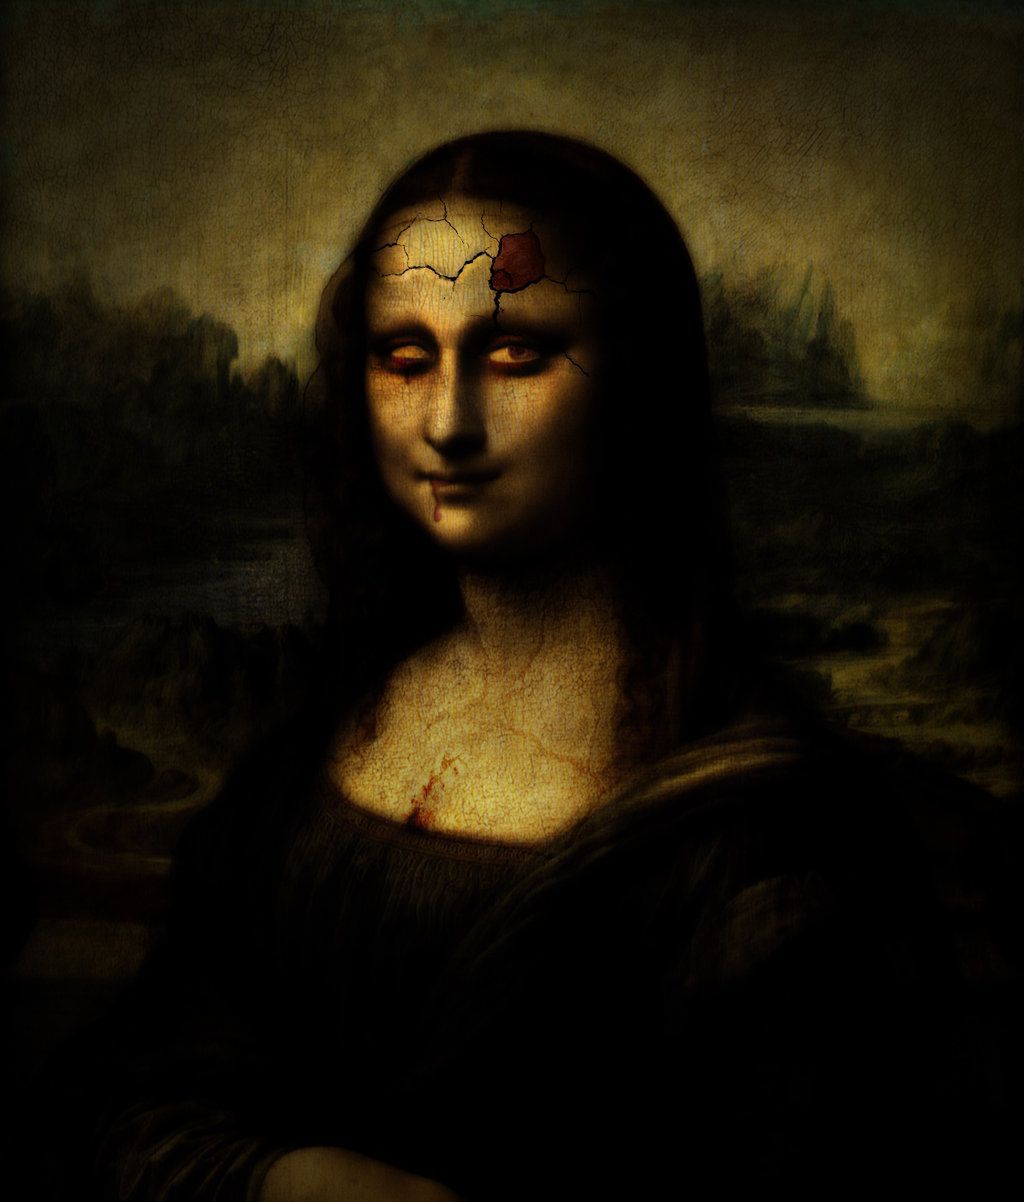 The painting of Mona Lisa is shown with a cracked face and a bloodied eye. - Mona Lisa